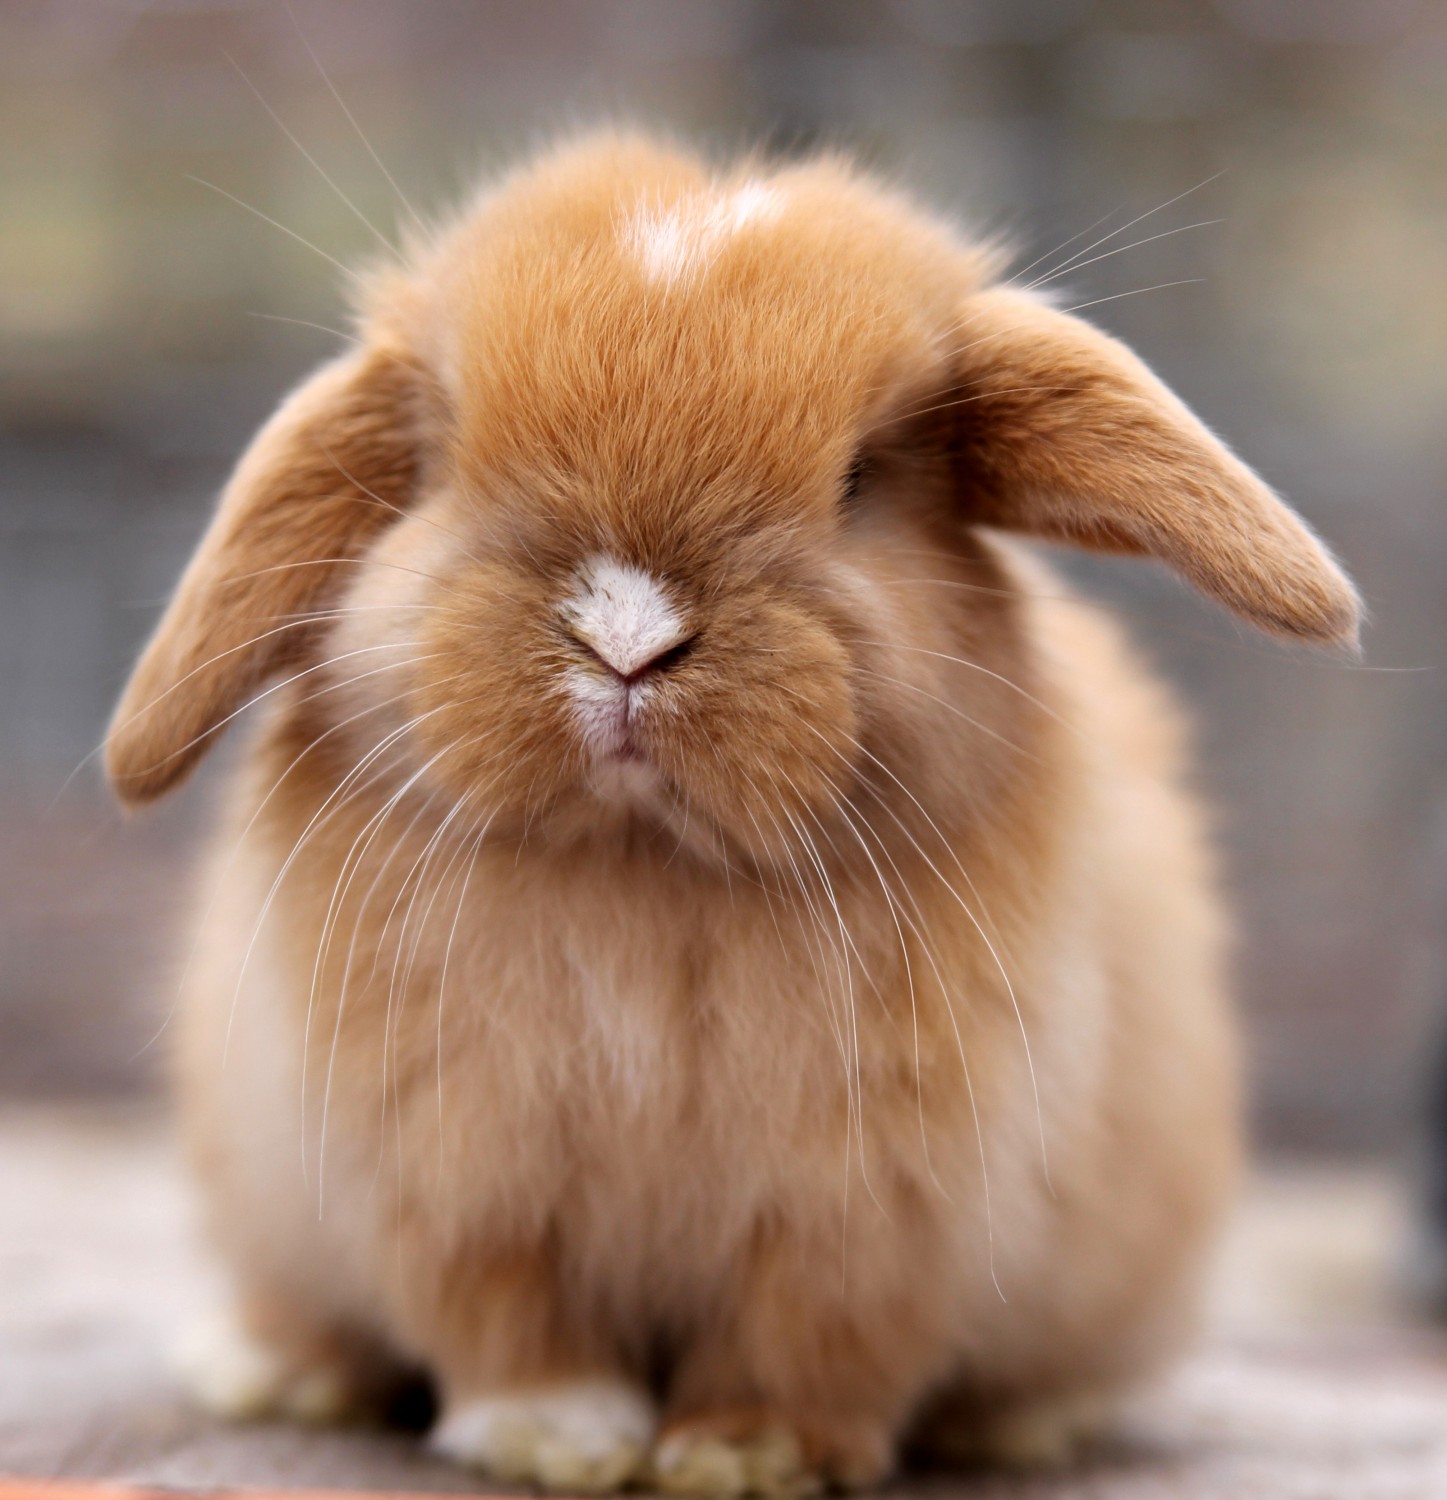 Collection 100+ Images pictures of holland lop rabbits Stunning